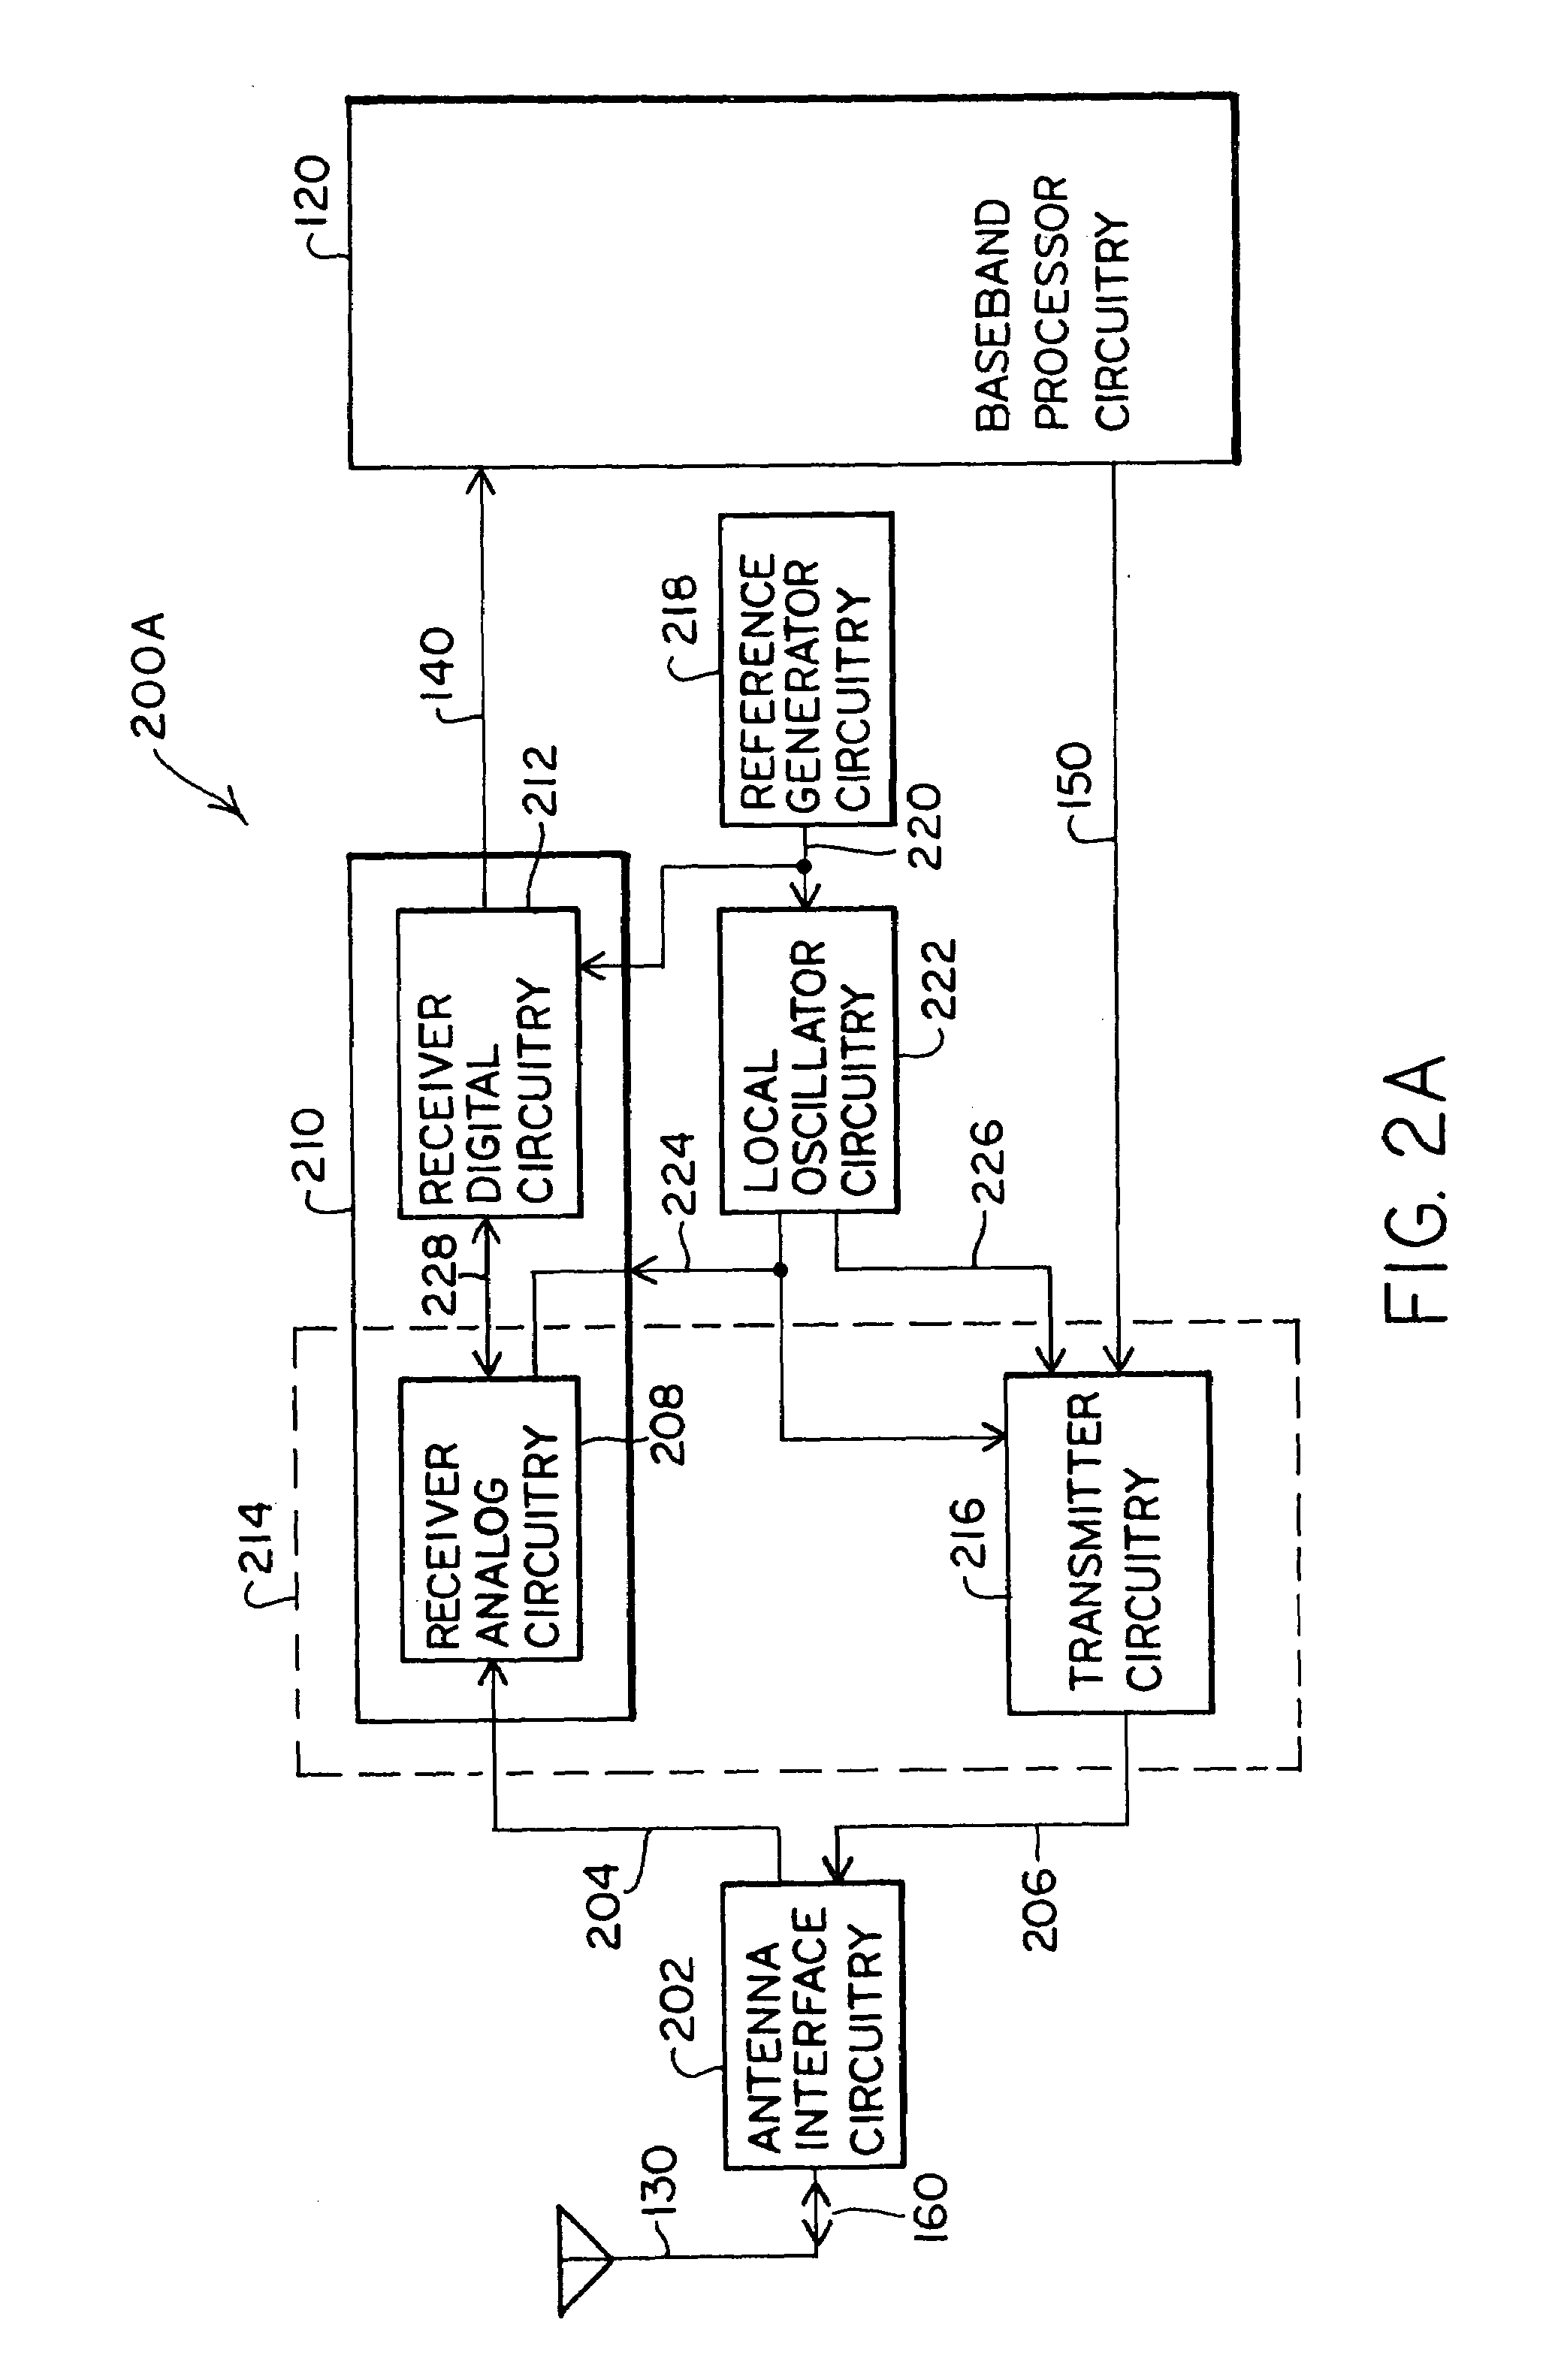 Systems and methods for providing an adjustable reference signal to RF circuitry